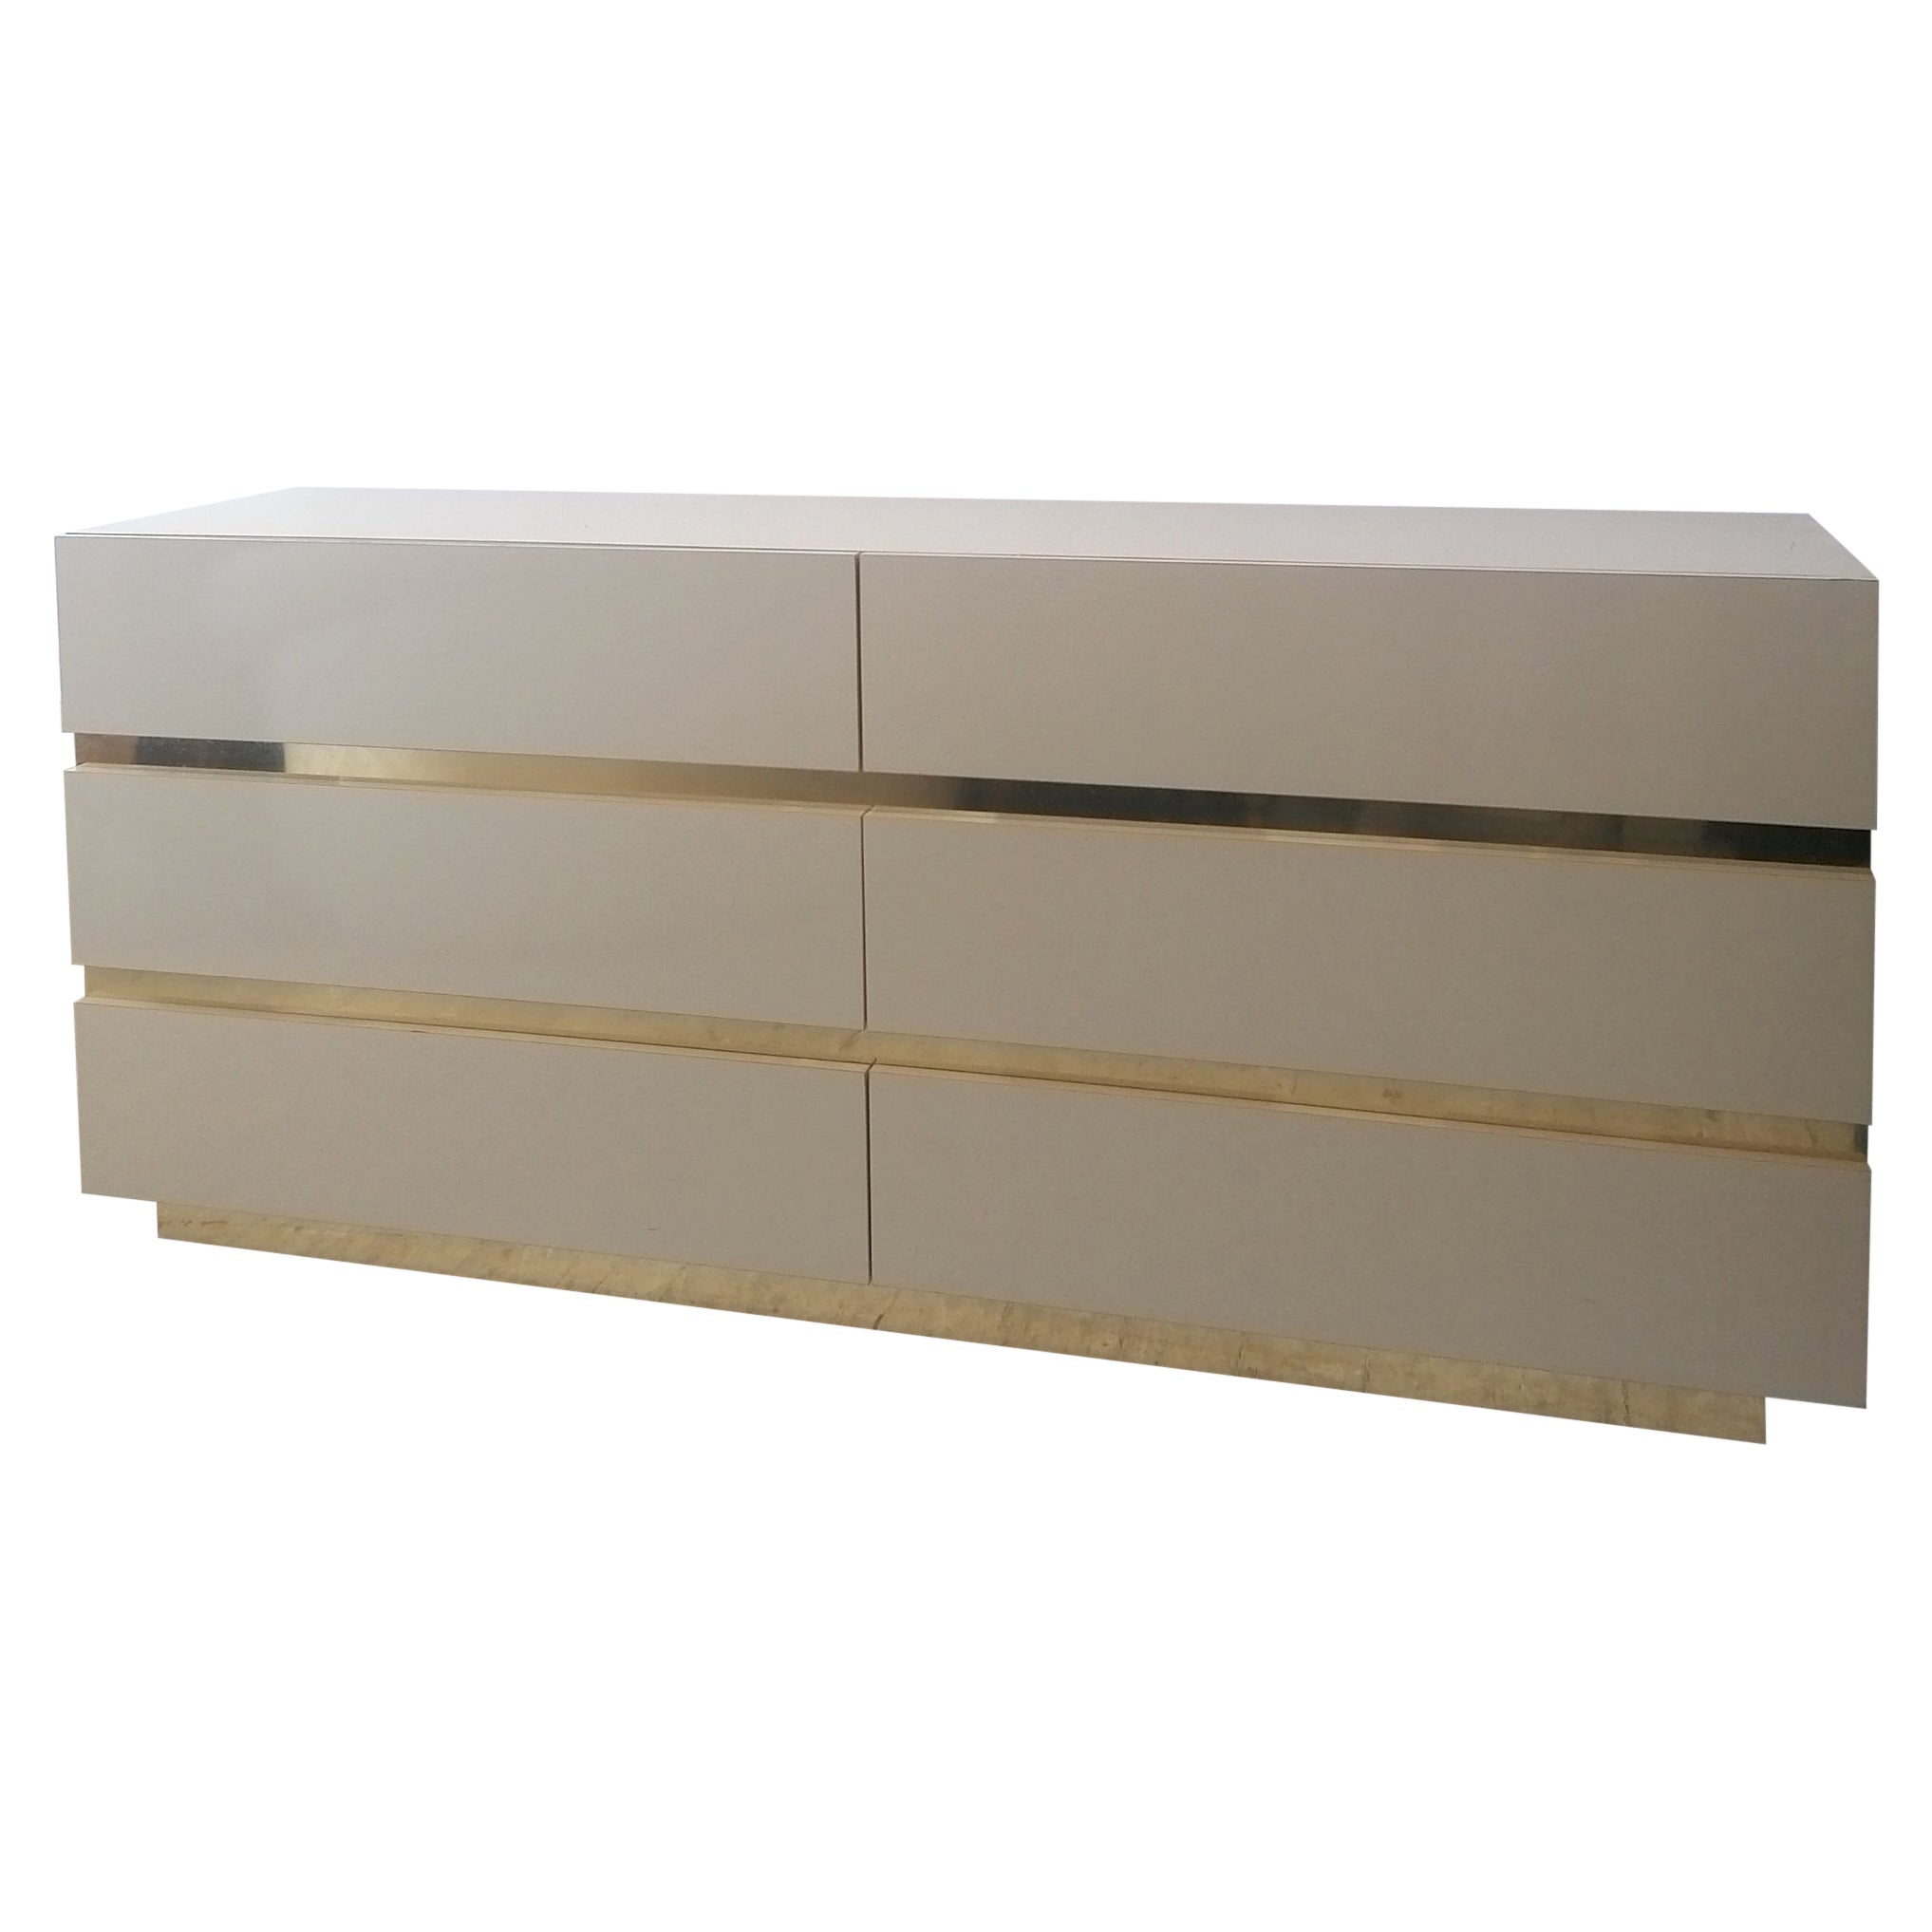 1980s American cream & gold metal sideboard / dresser with drawers For Sale